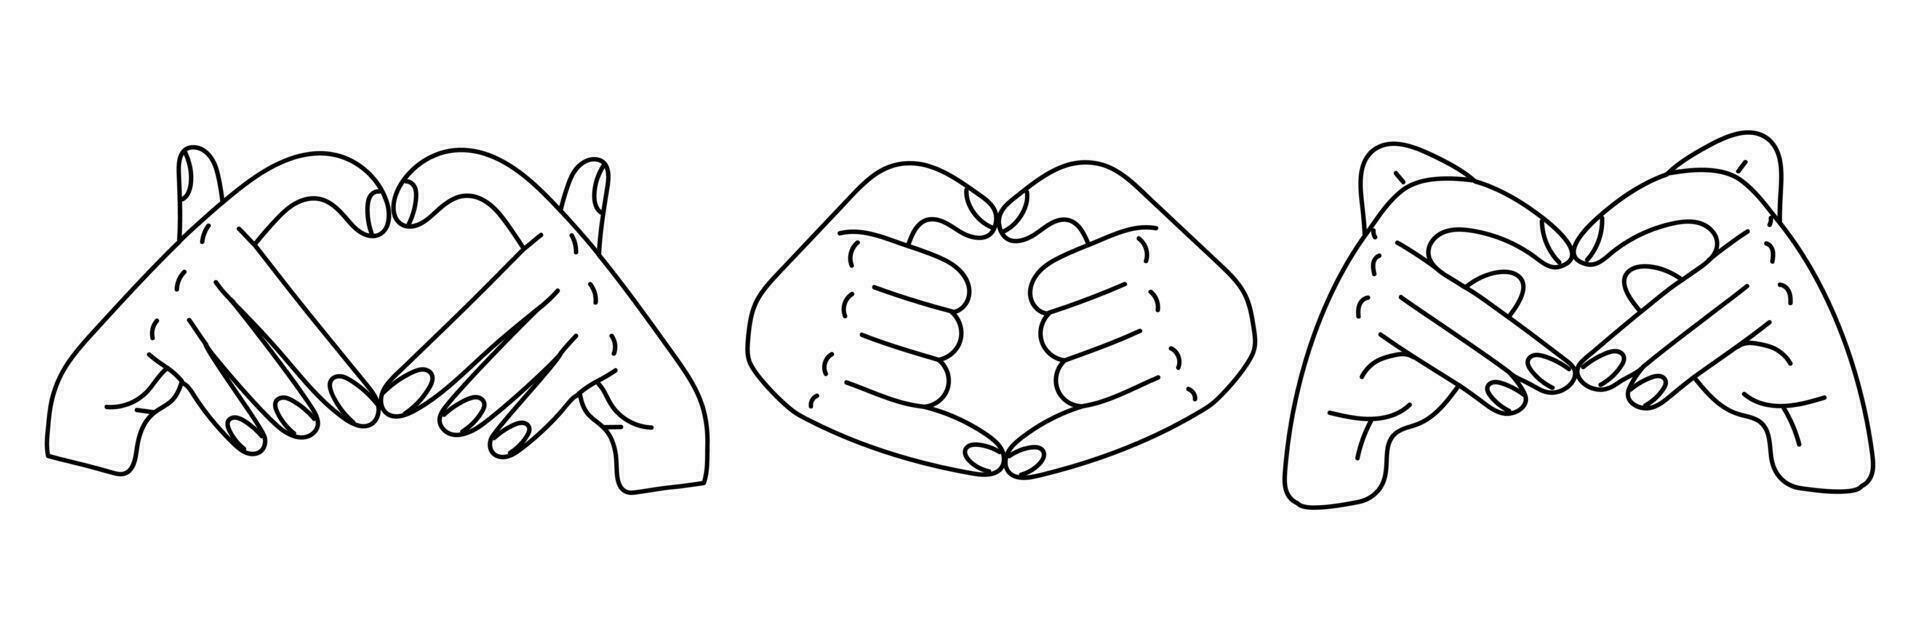 A pair of hands with a heart sign indicating I love you. Valentine's Day images, heart shapes with one hand. Contoured hands join at the heart, different options. One person shows love for others vector